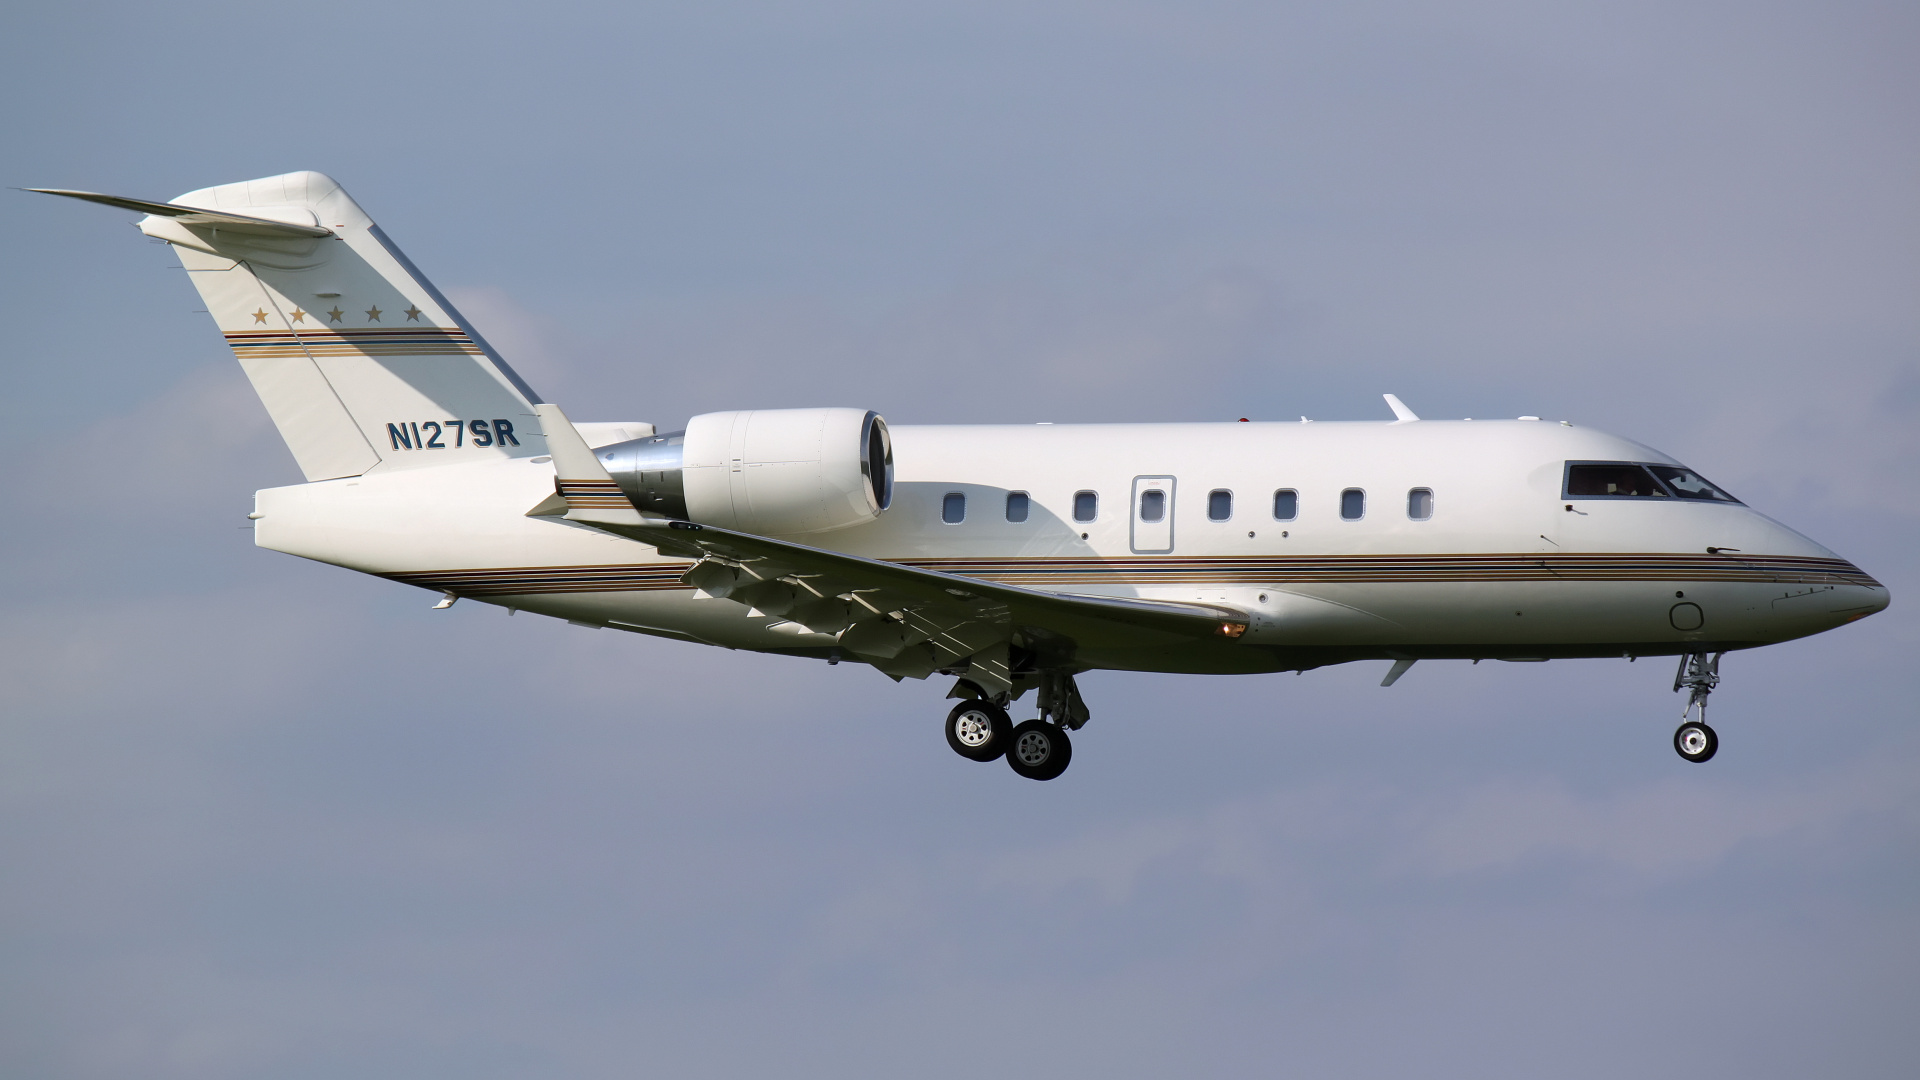 N127SR, private (Aircraft » EPWA Spotting » Bombardier CL-600 Challenger 60x » Challenger 604)